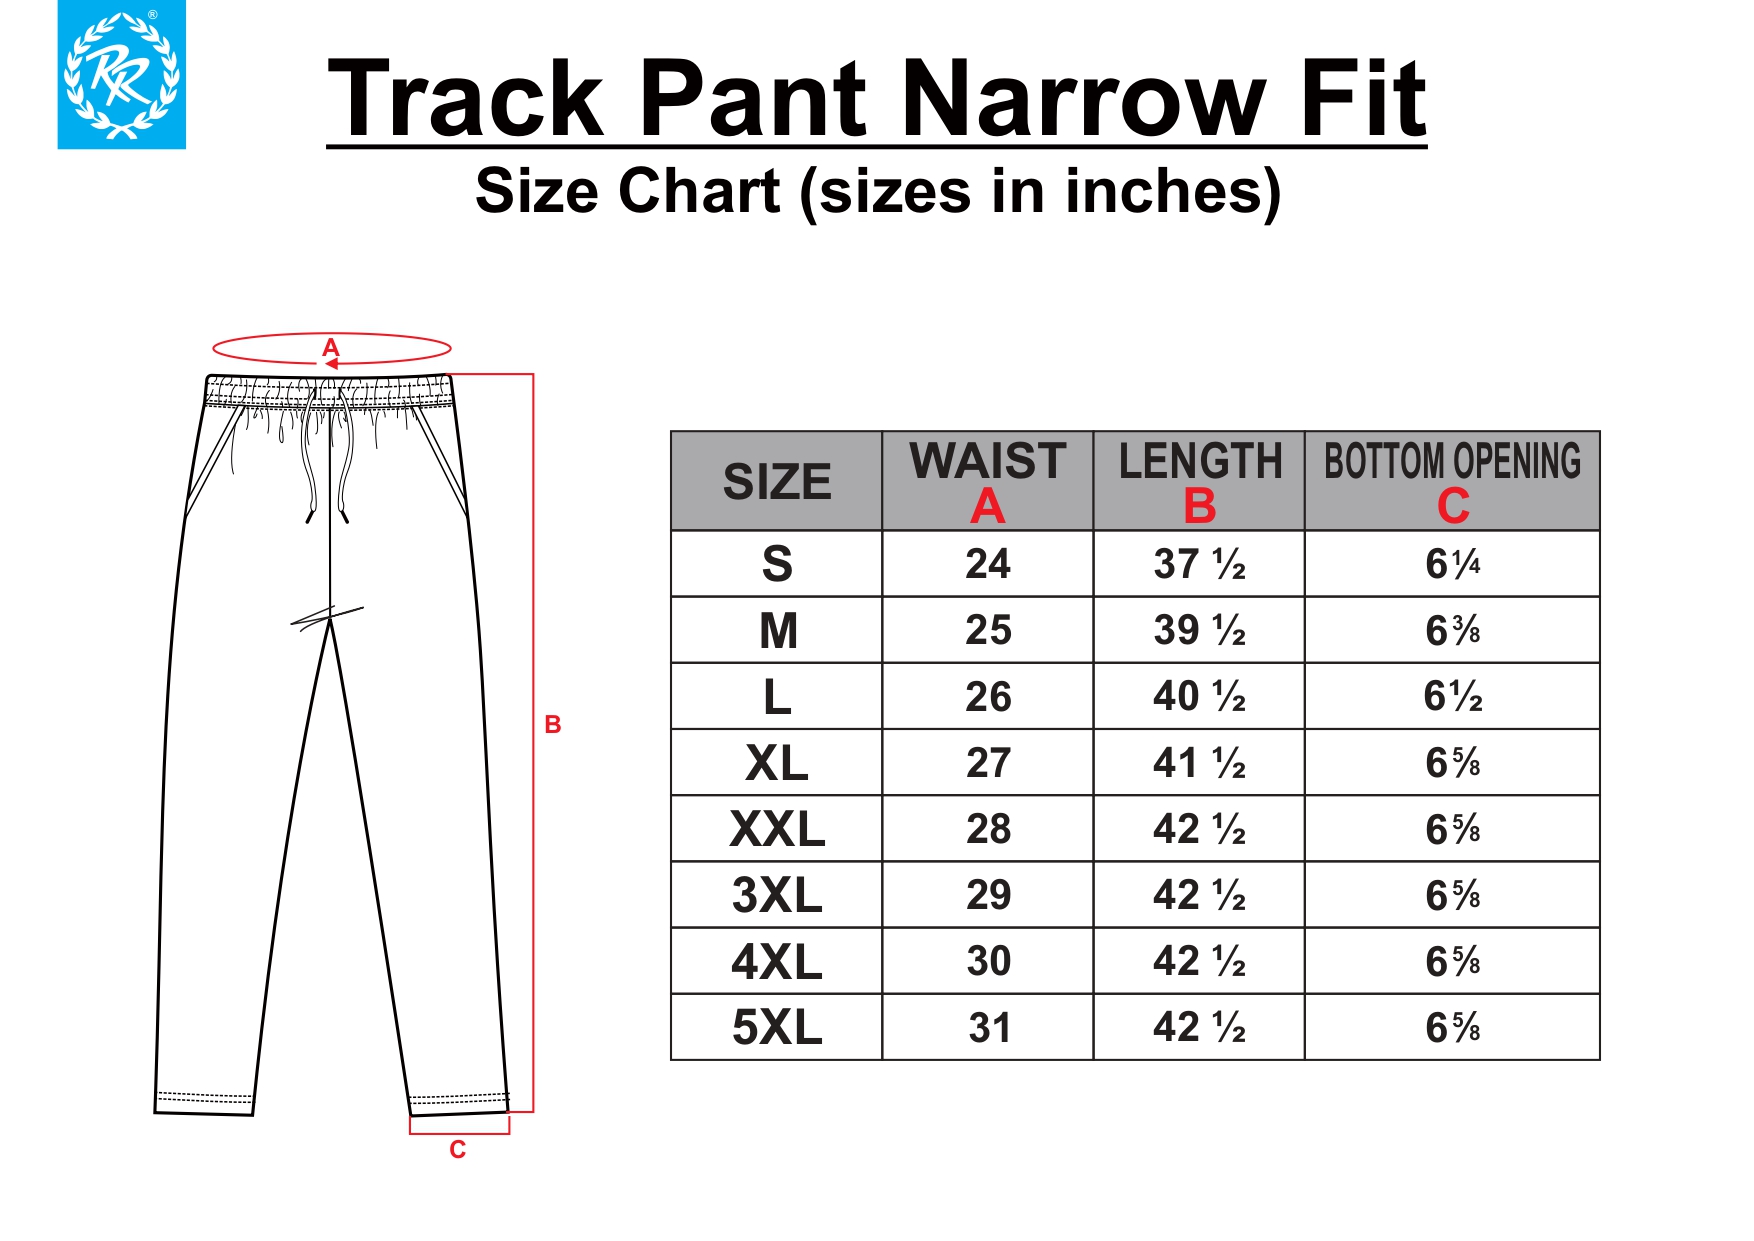 https://www.rrsportswear.com/assets/images/product-chart-images/Track_Pant_Narrow_Fit_Size_Measurement_page-000119.jpg